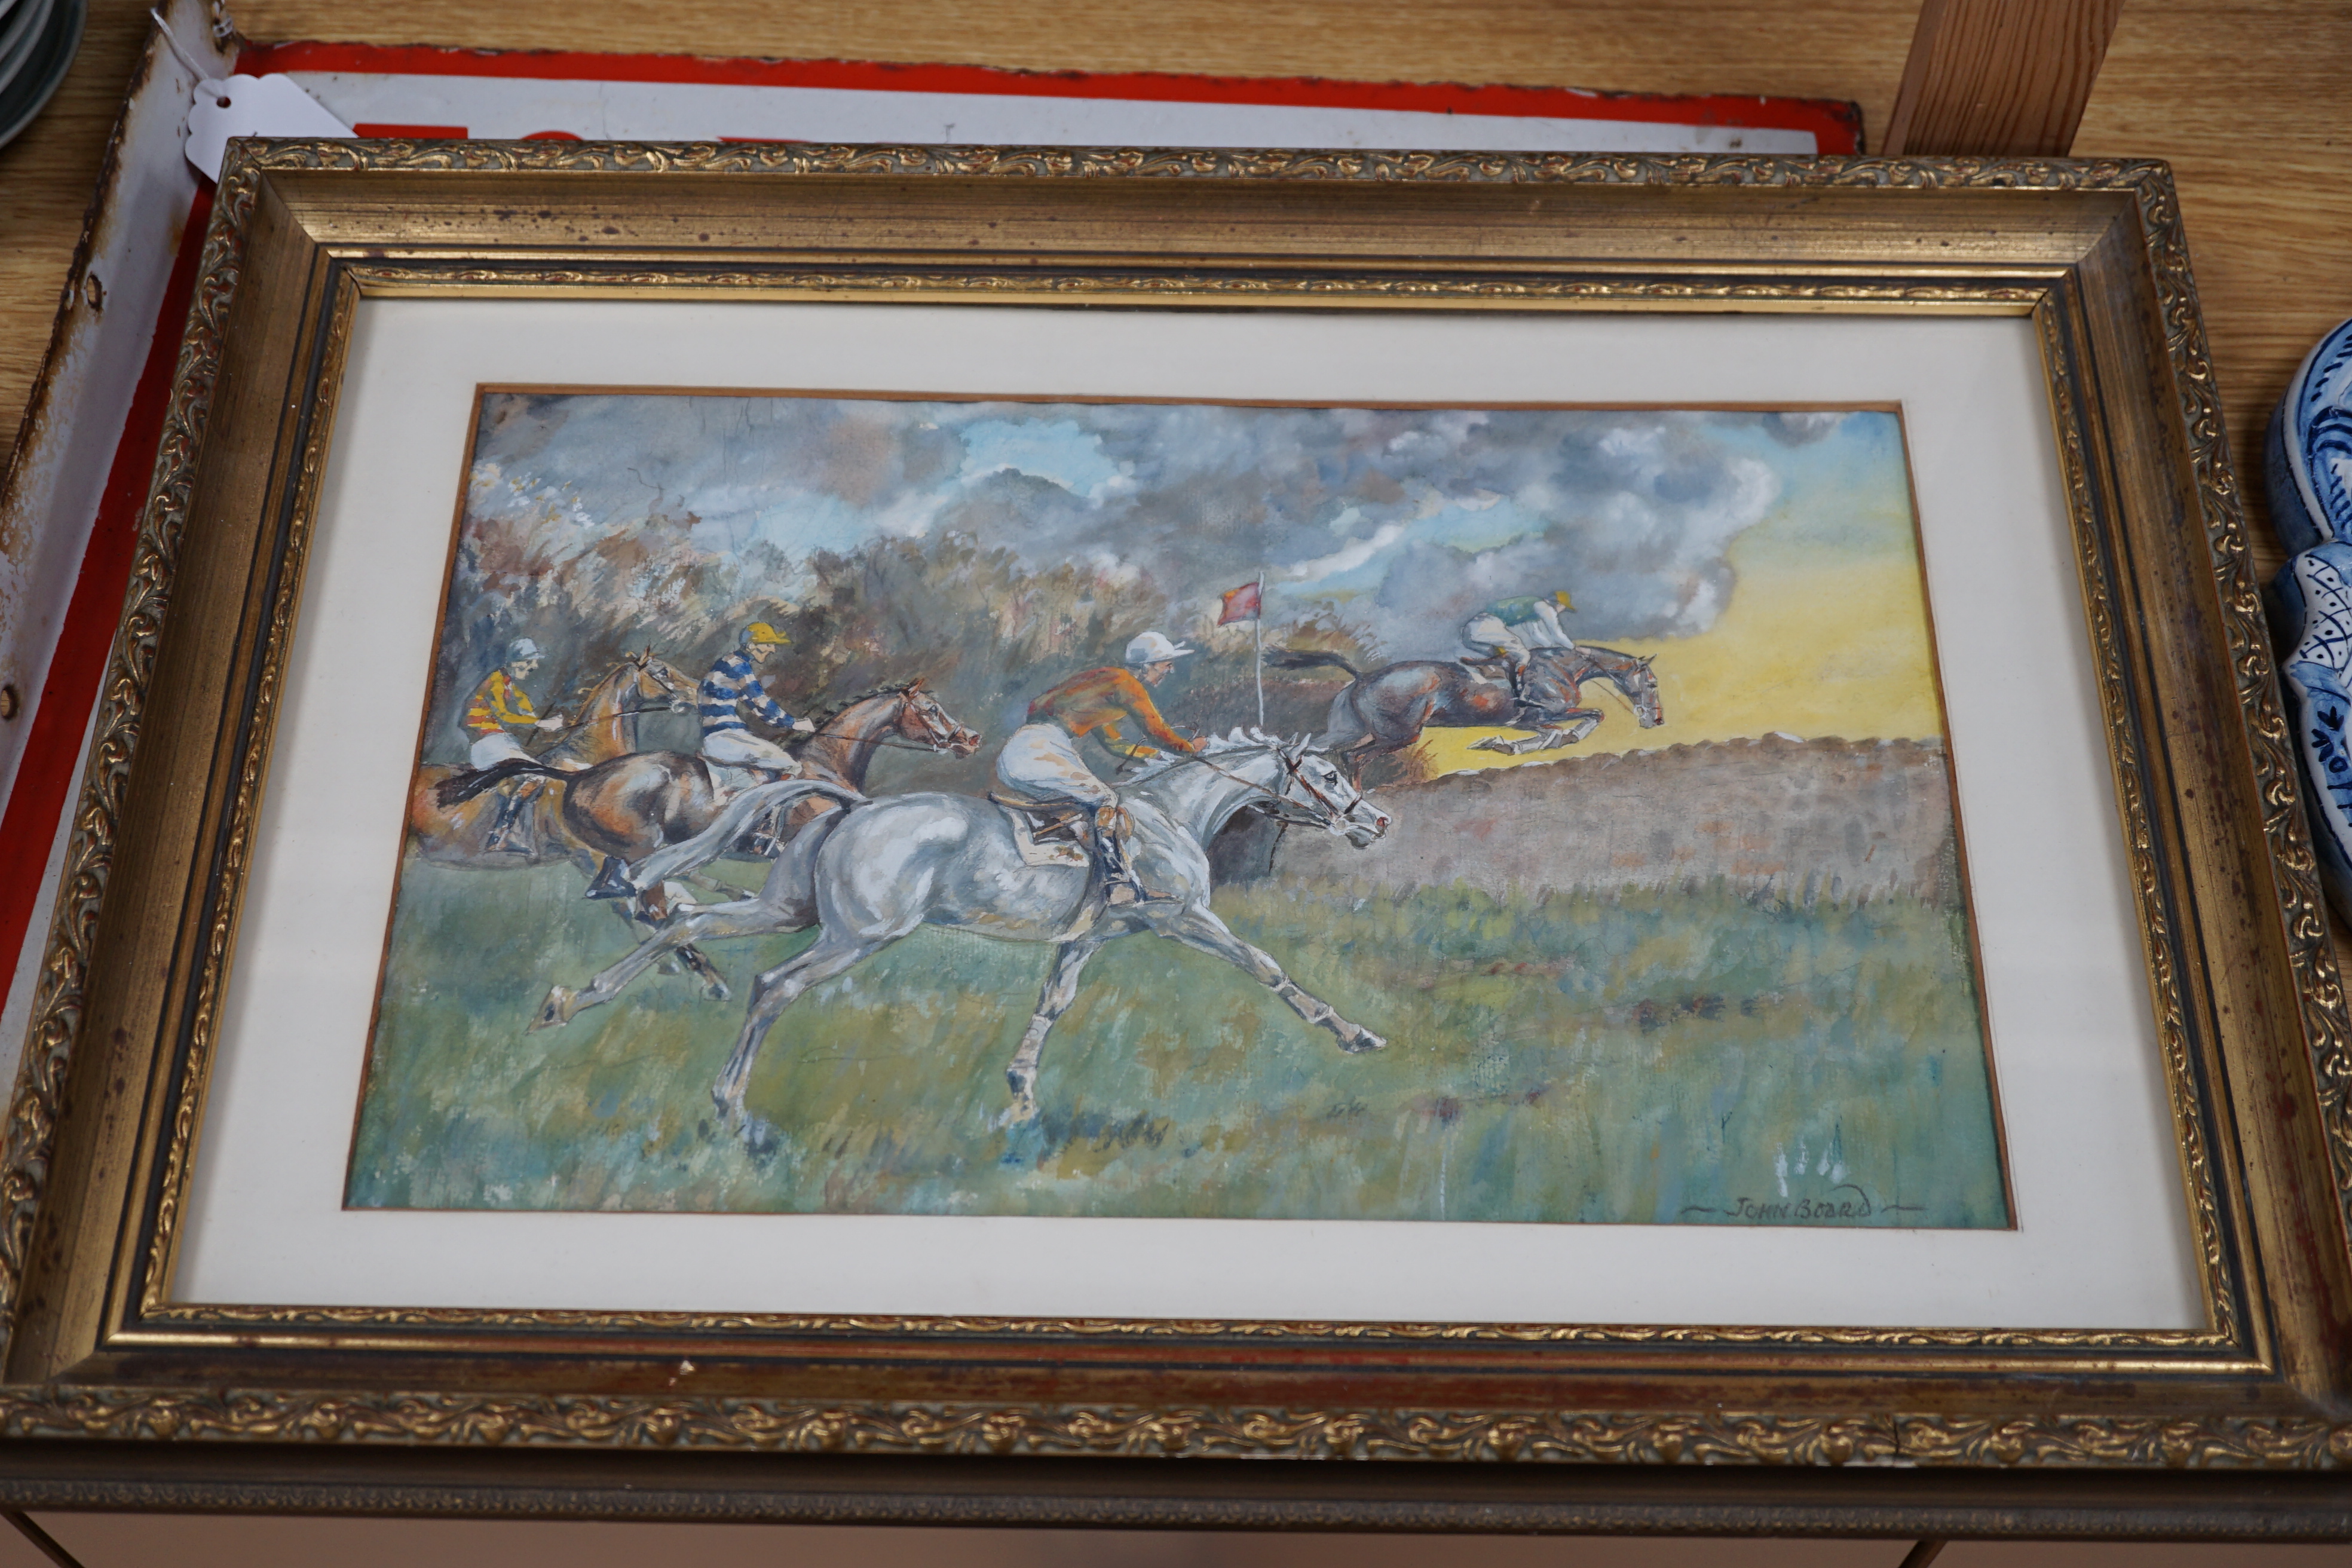 John Broad, watercolour, Steeplechasing, signed, 22 x 35cm, gilt framed. Condition - fair, rippling to the paper